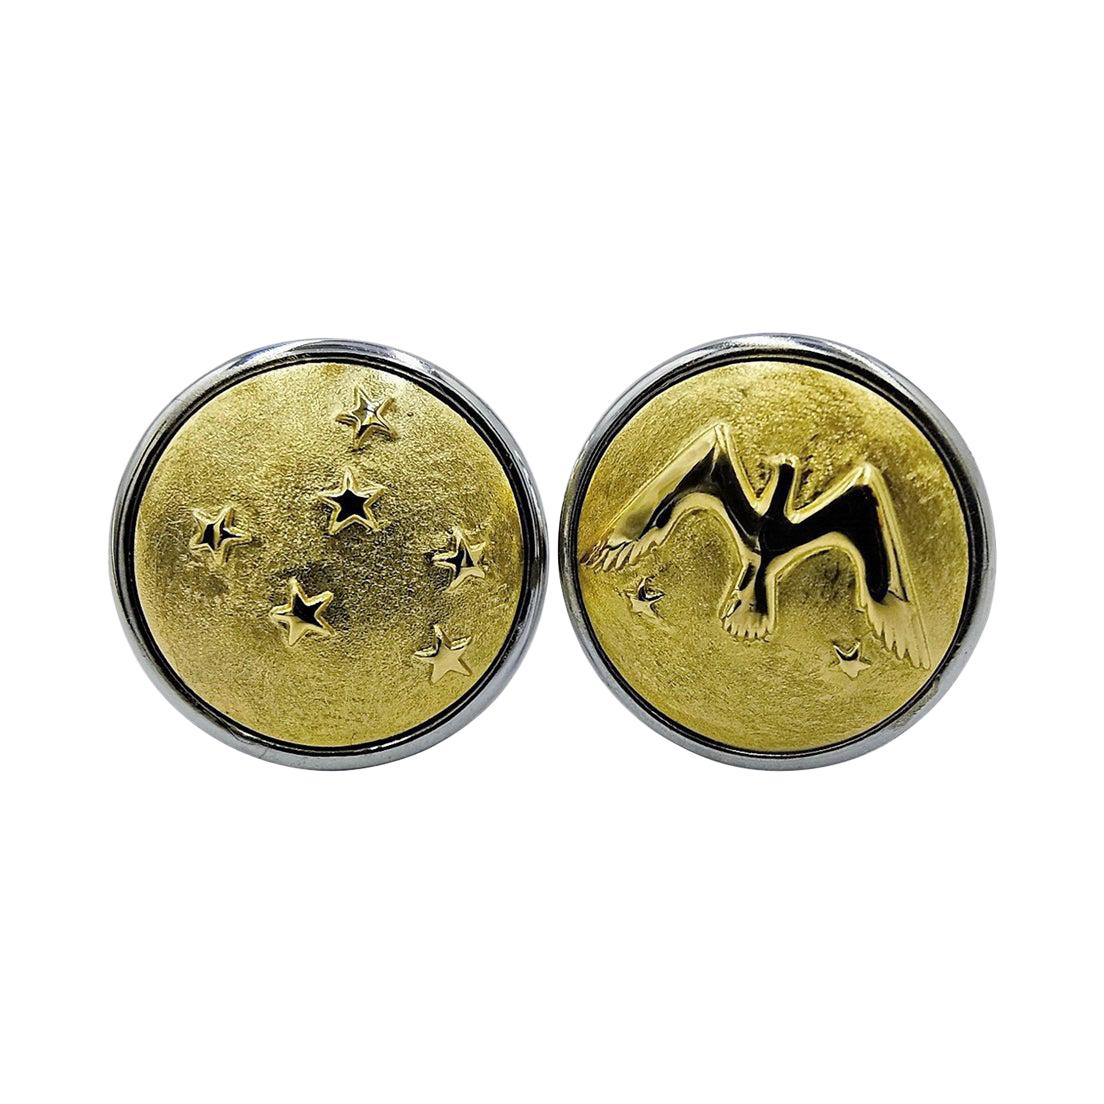 Luca Jouel Decorative Eagle and Stars Cufflinks in Yellow Gold and Silver